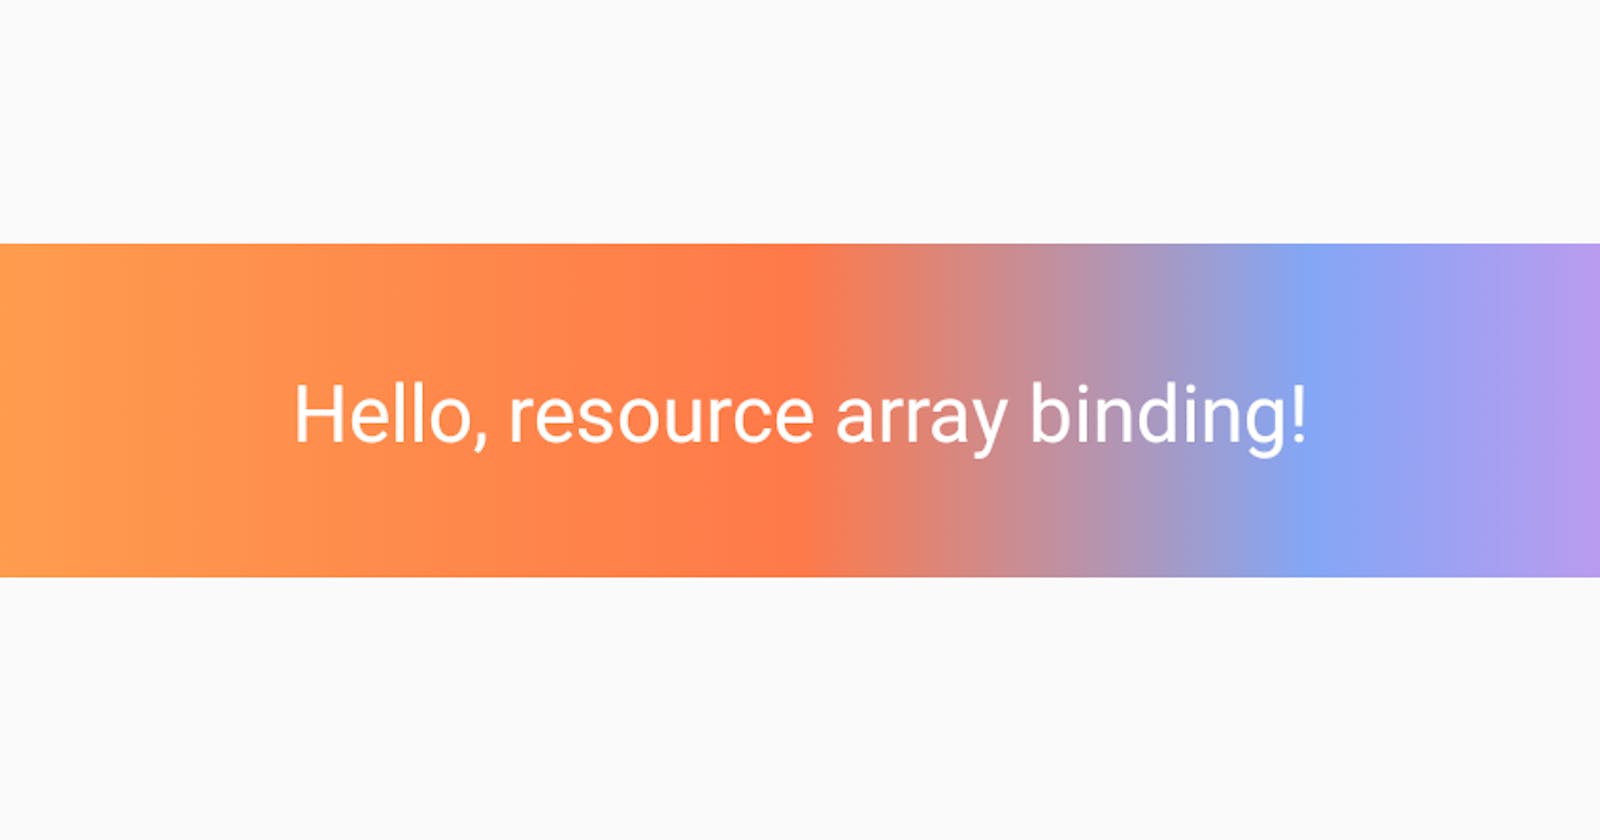 How to access a list of resources via data binding